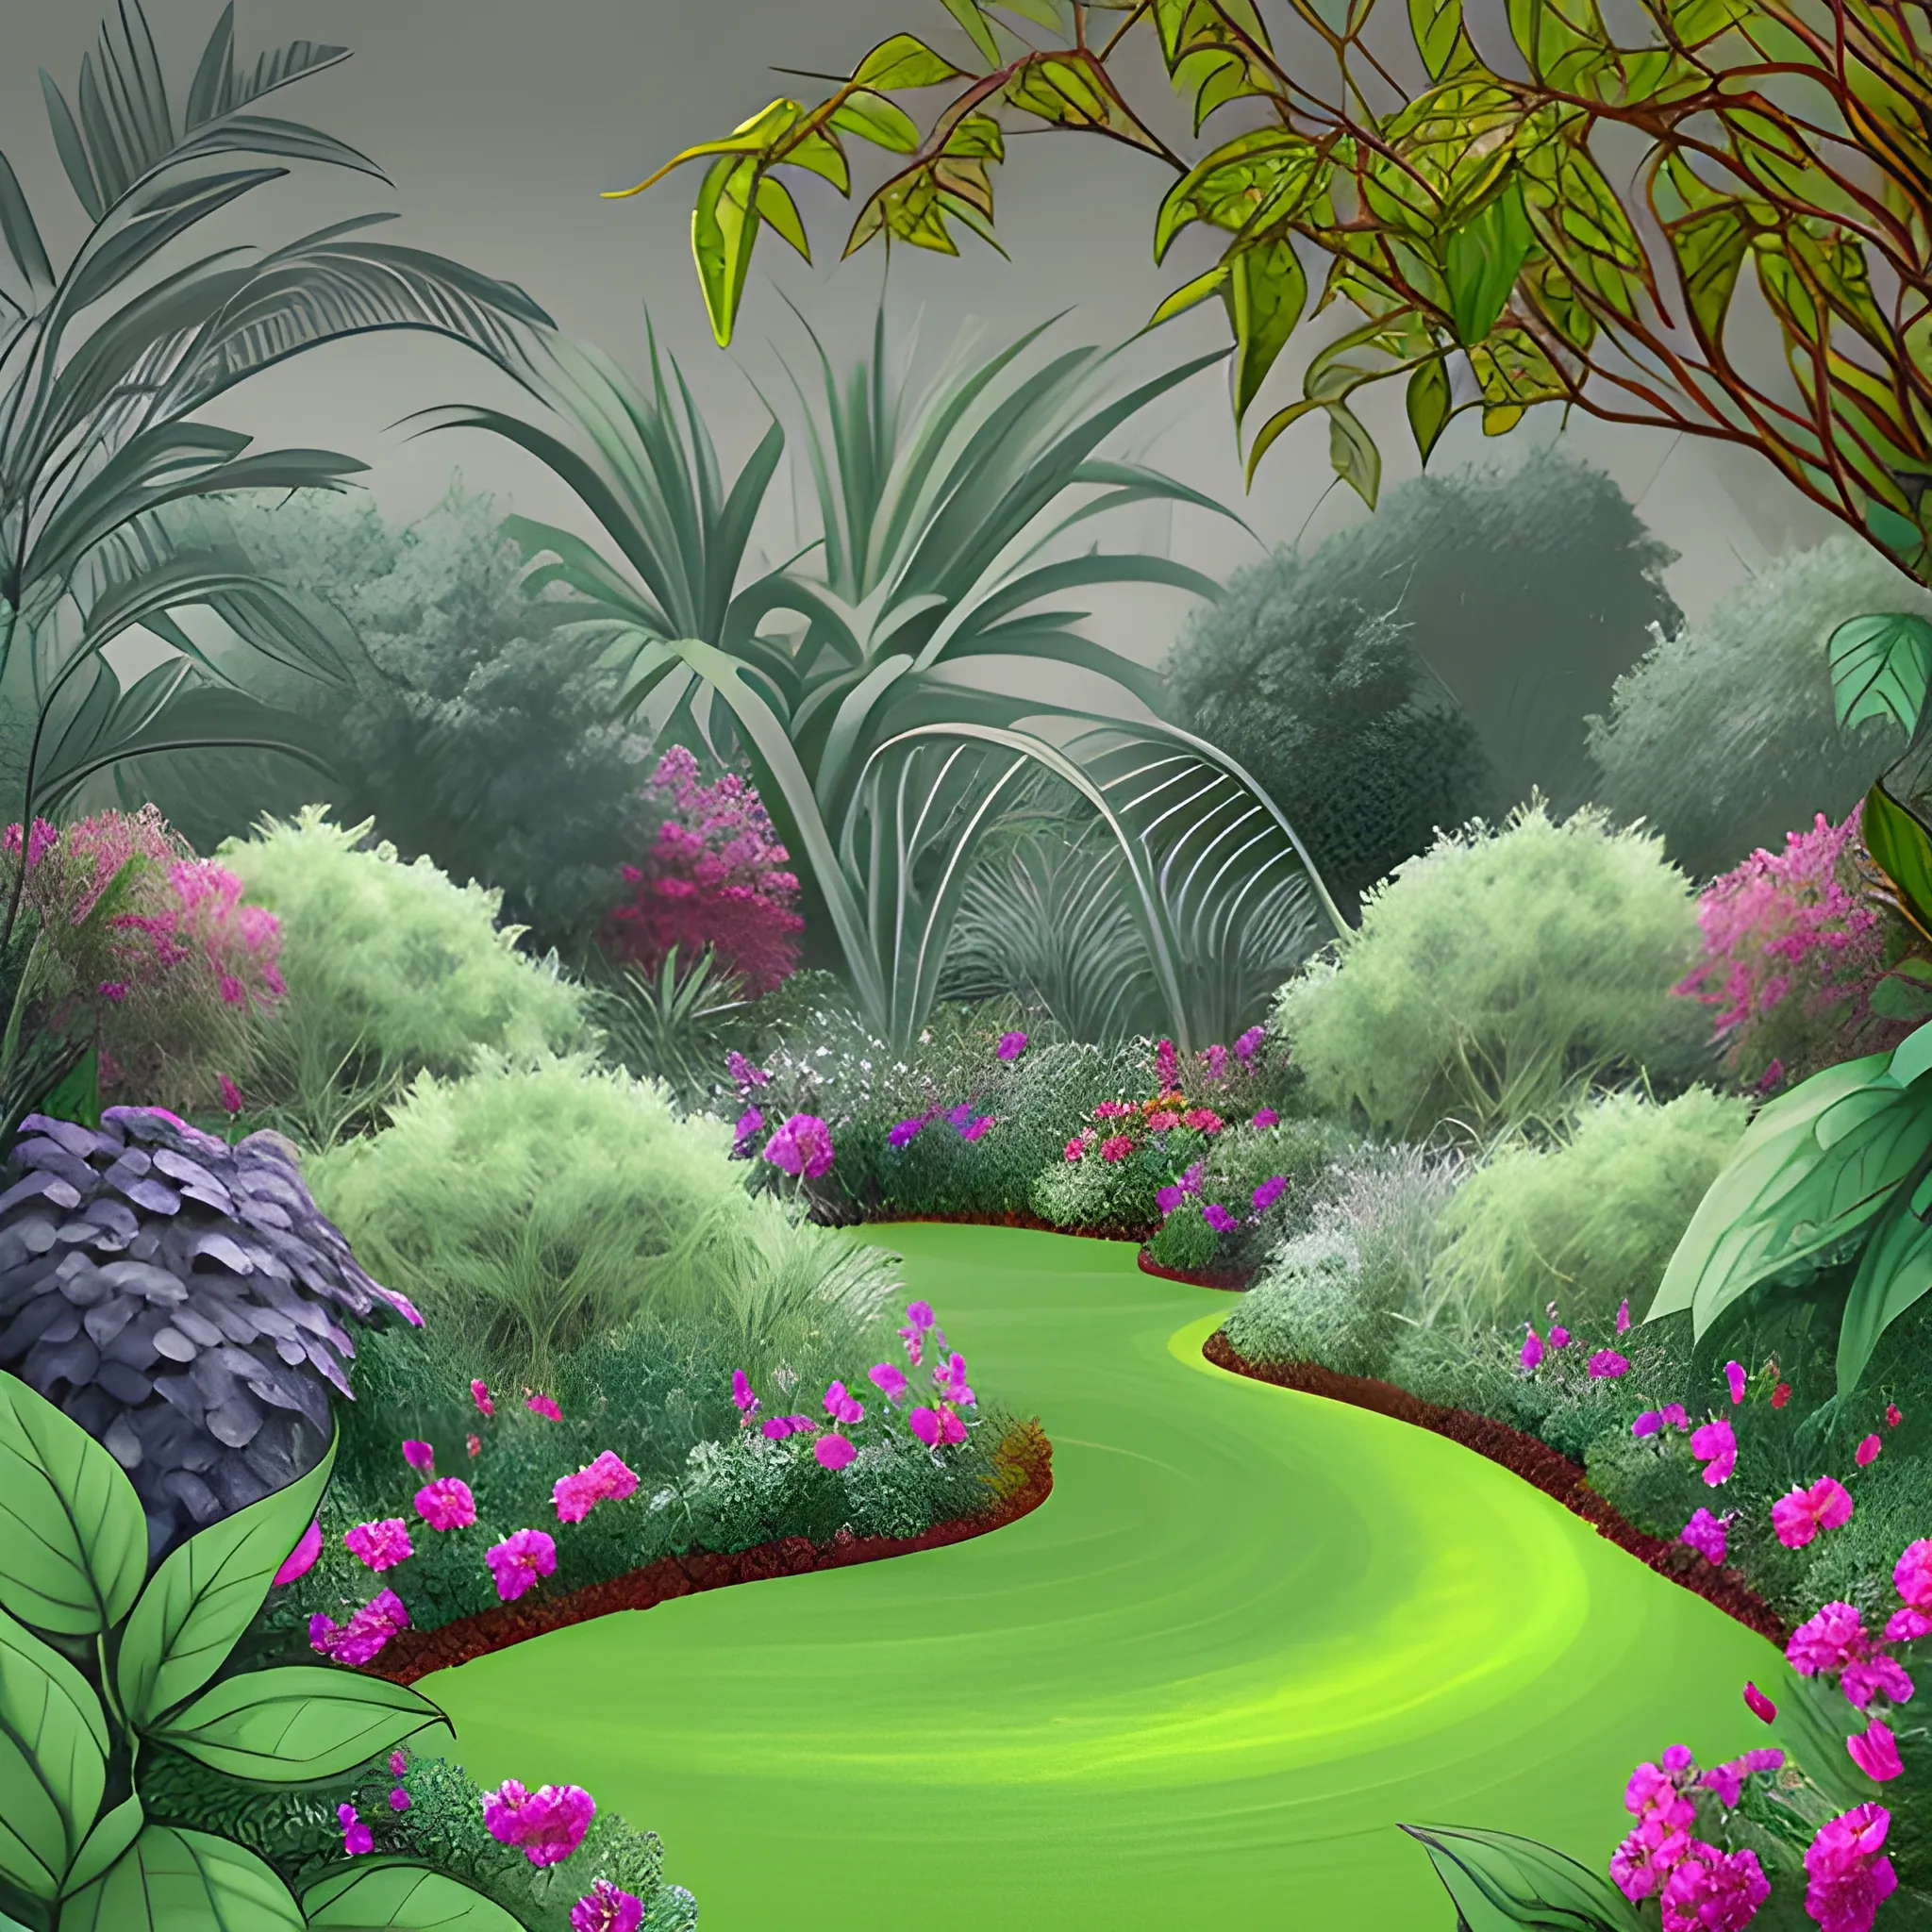 garden with very large leafy plants in digital painting style with warm gray colors